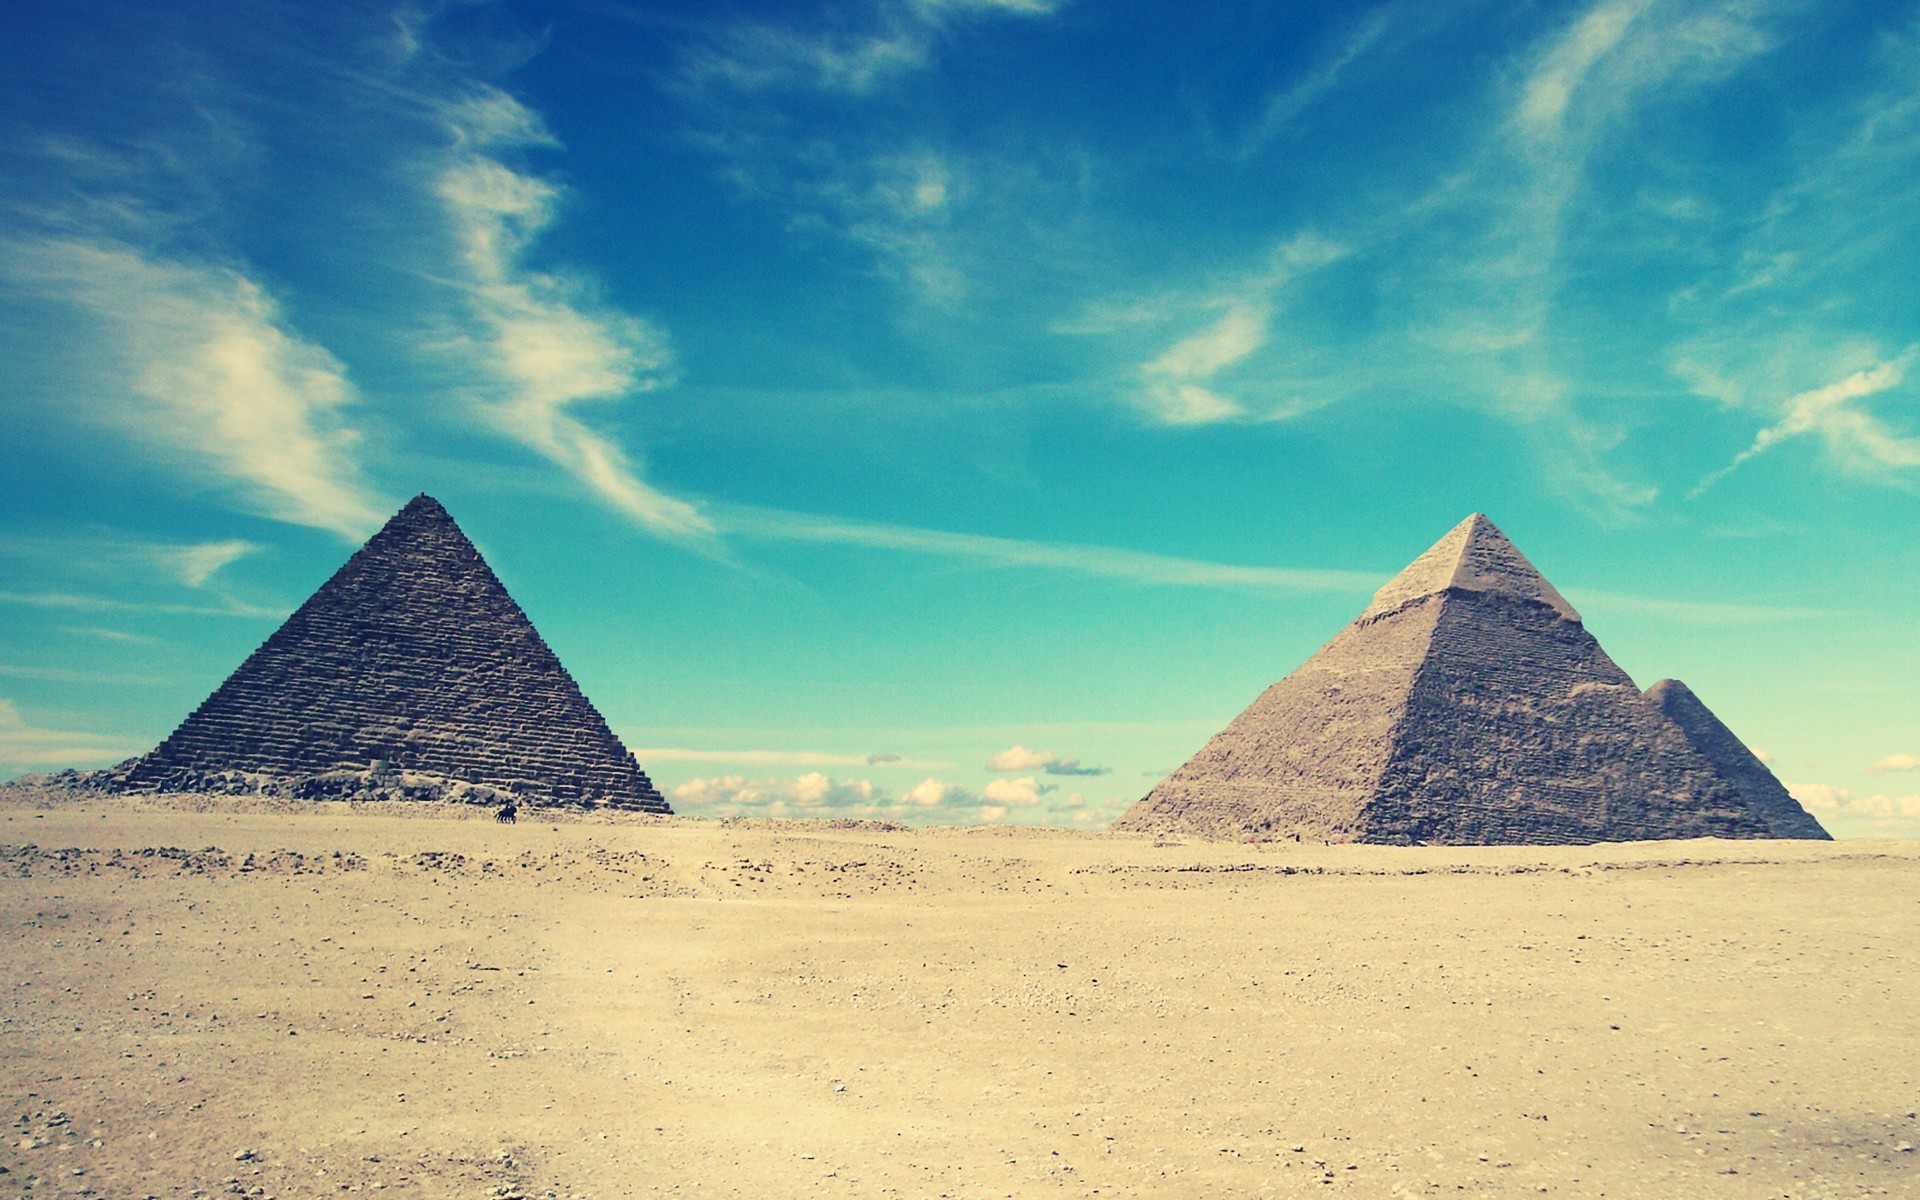 Awesome Egypt Wallpaper